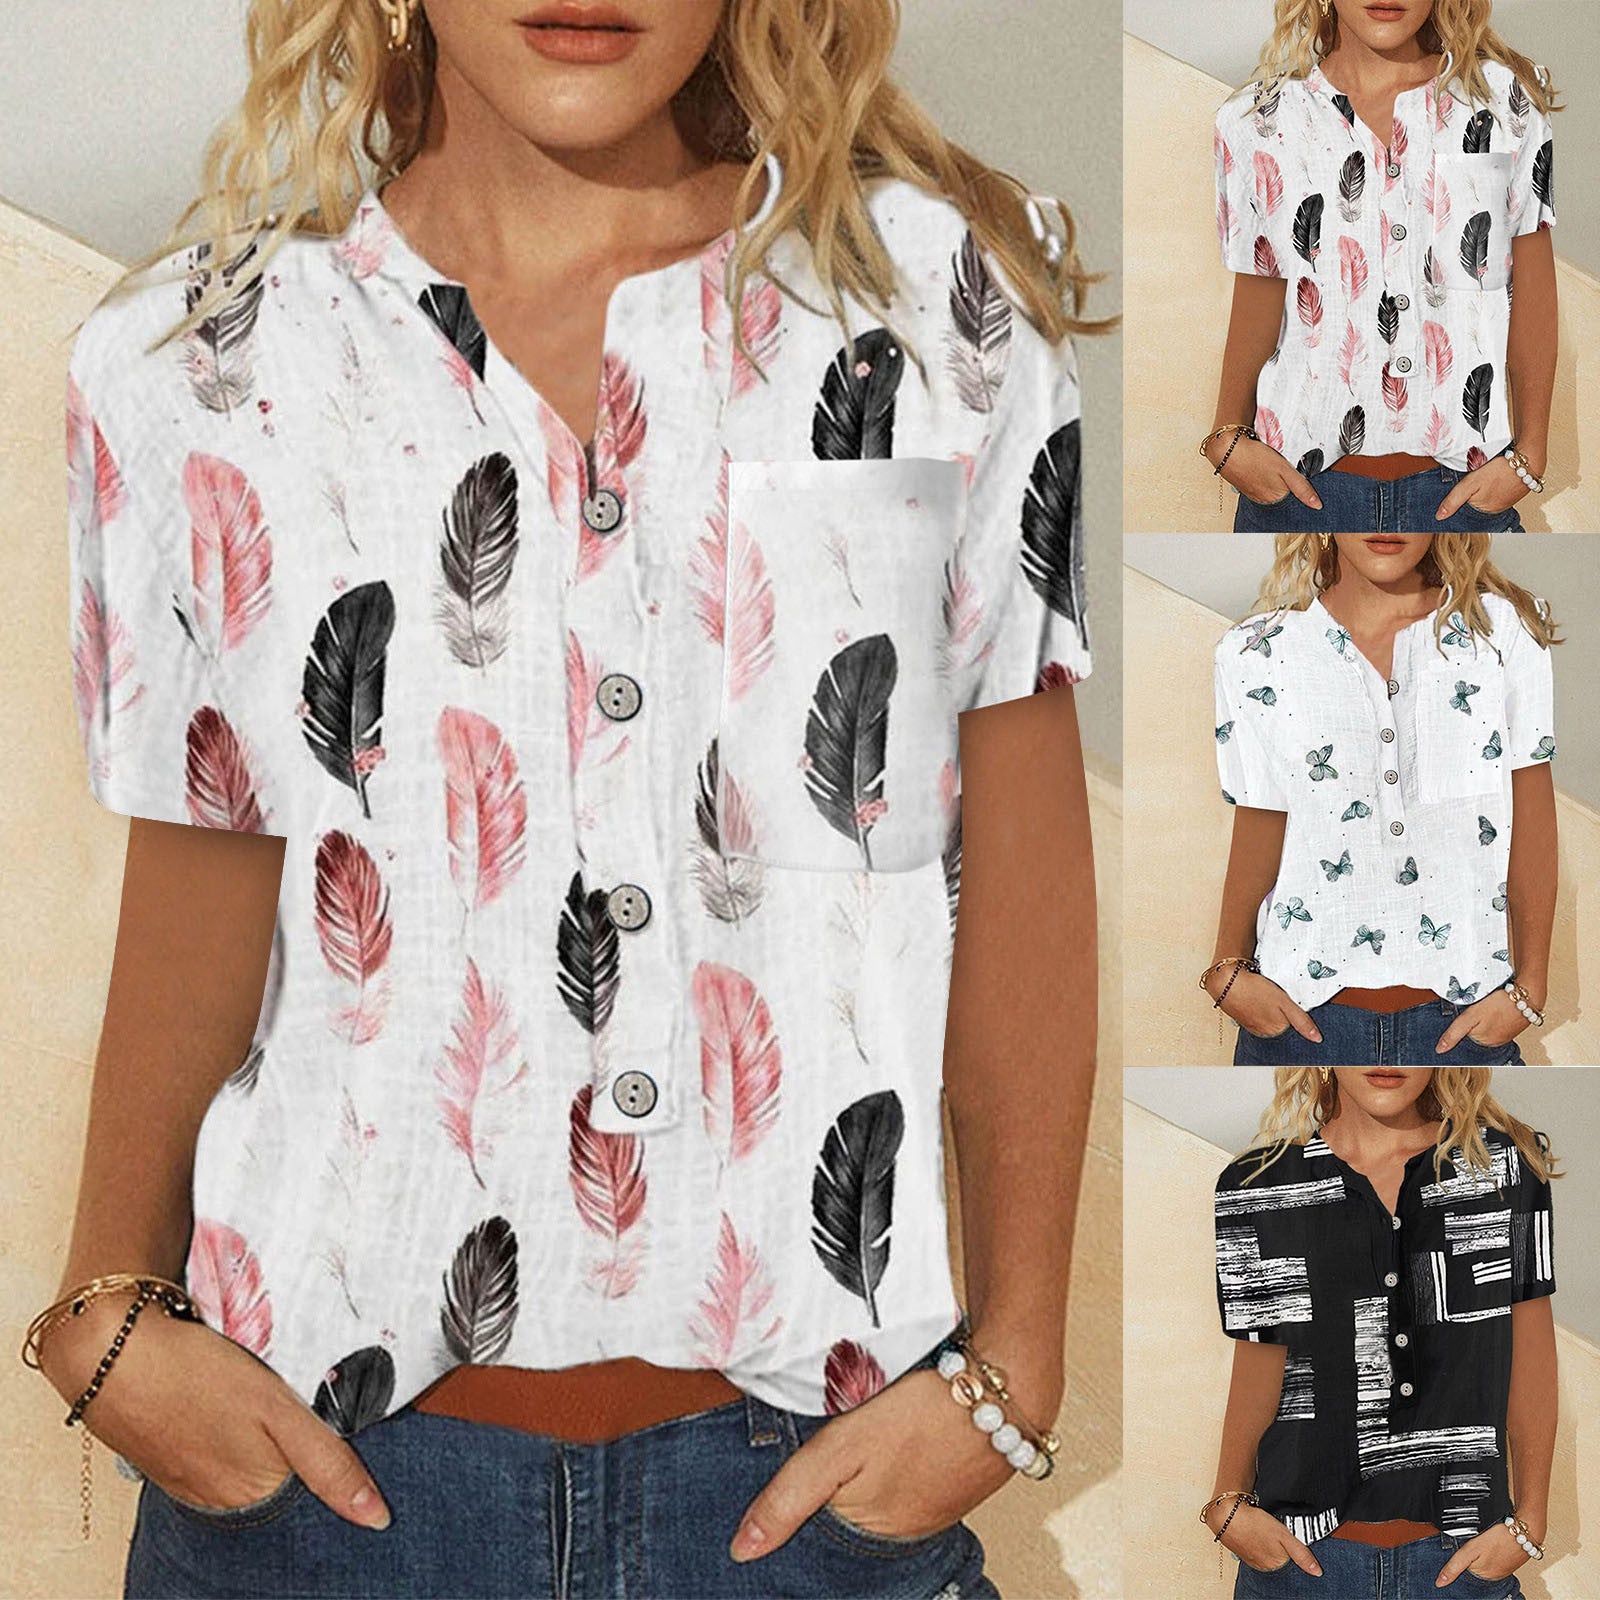 Women's Printed Loose Shirt Casual Village Leaf Tops